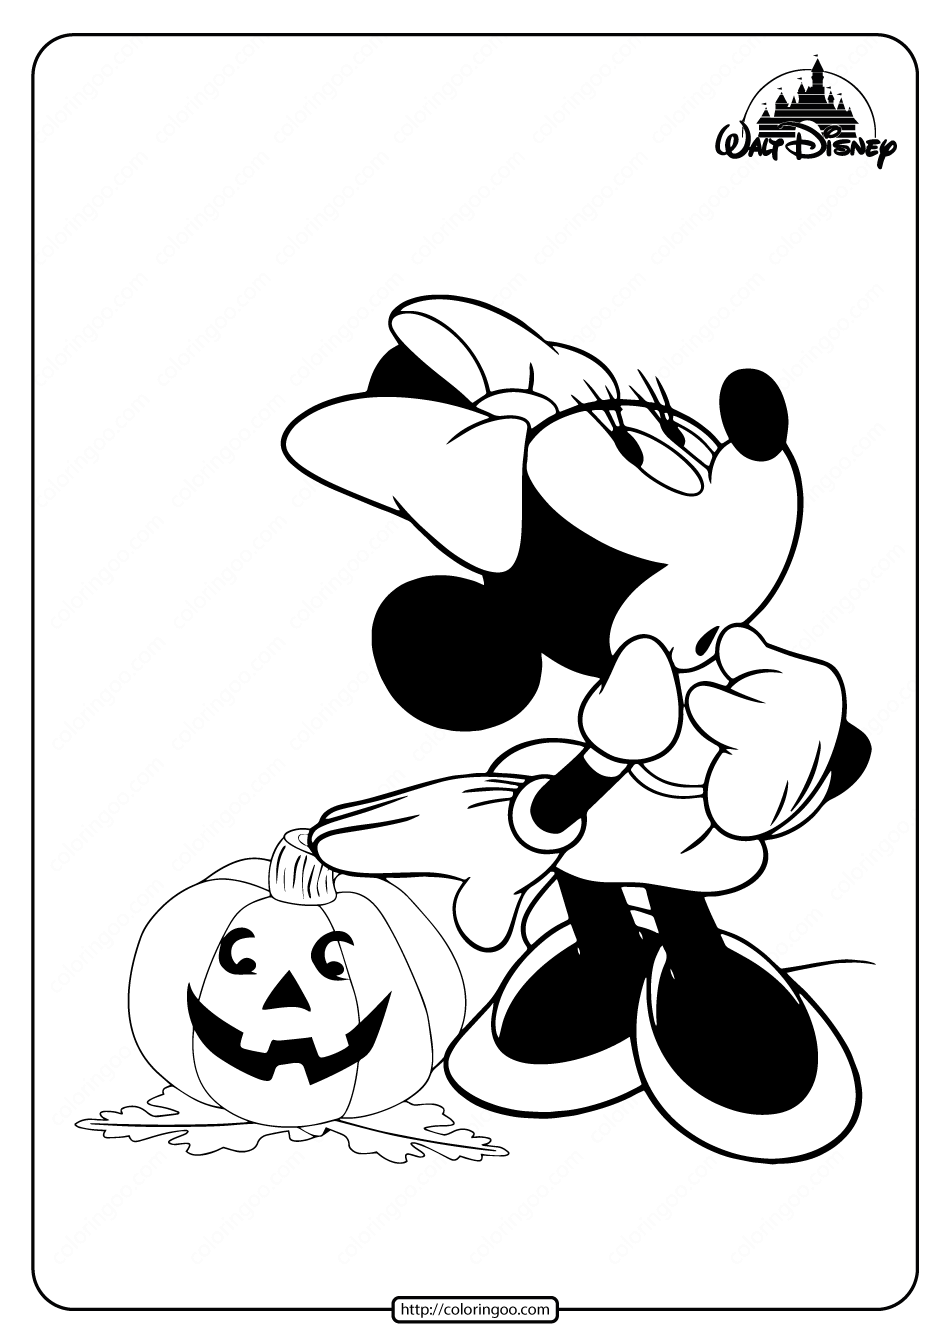 Printable Minnie Mouse Halloween Coloring Pages